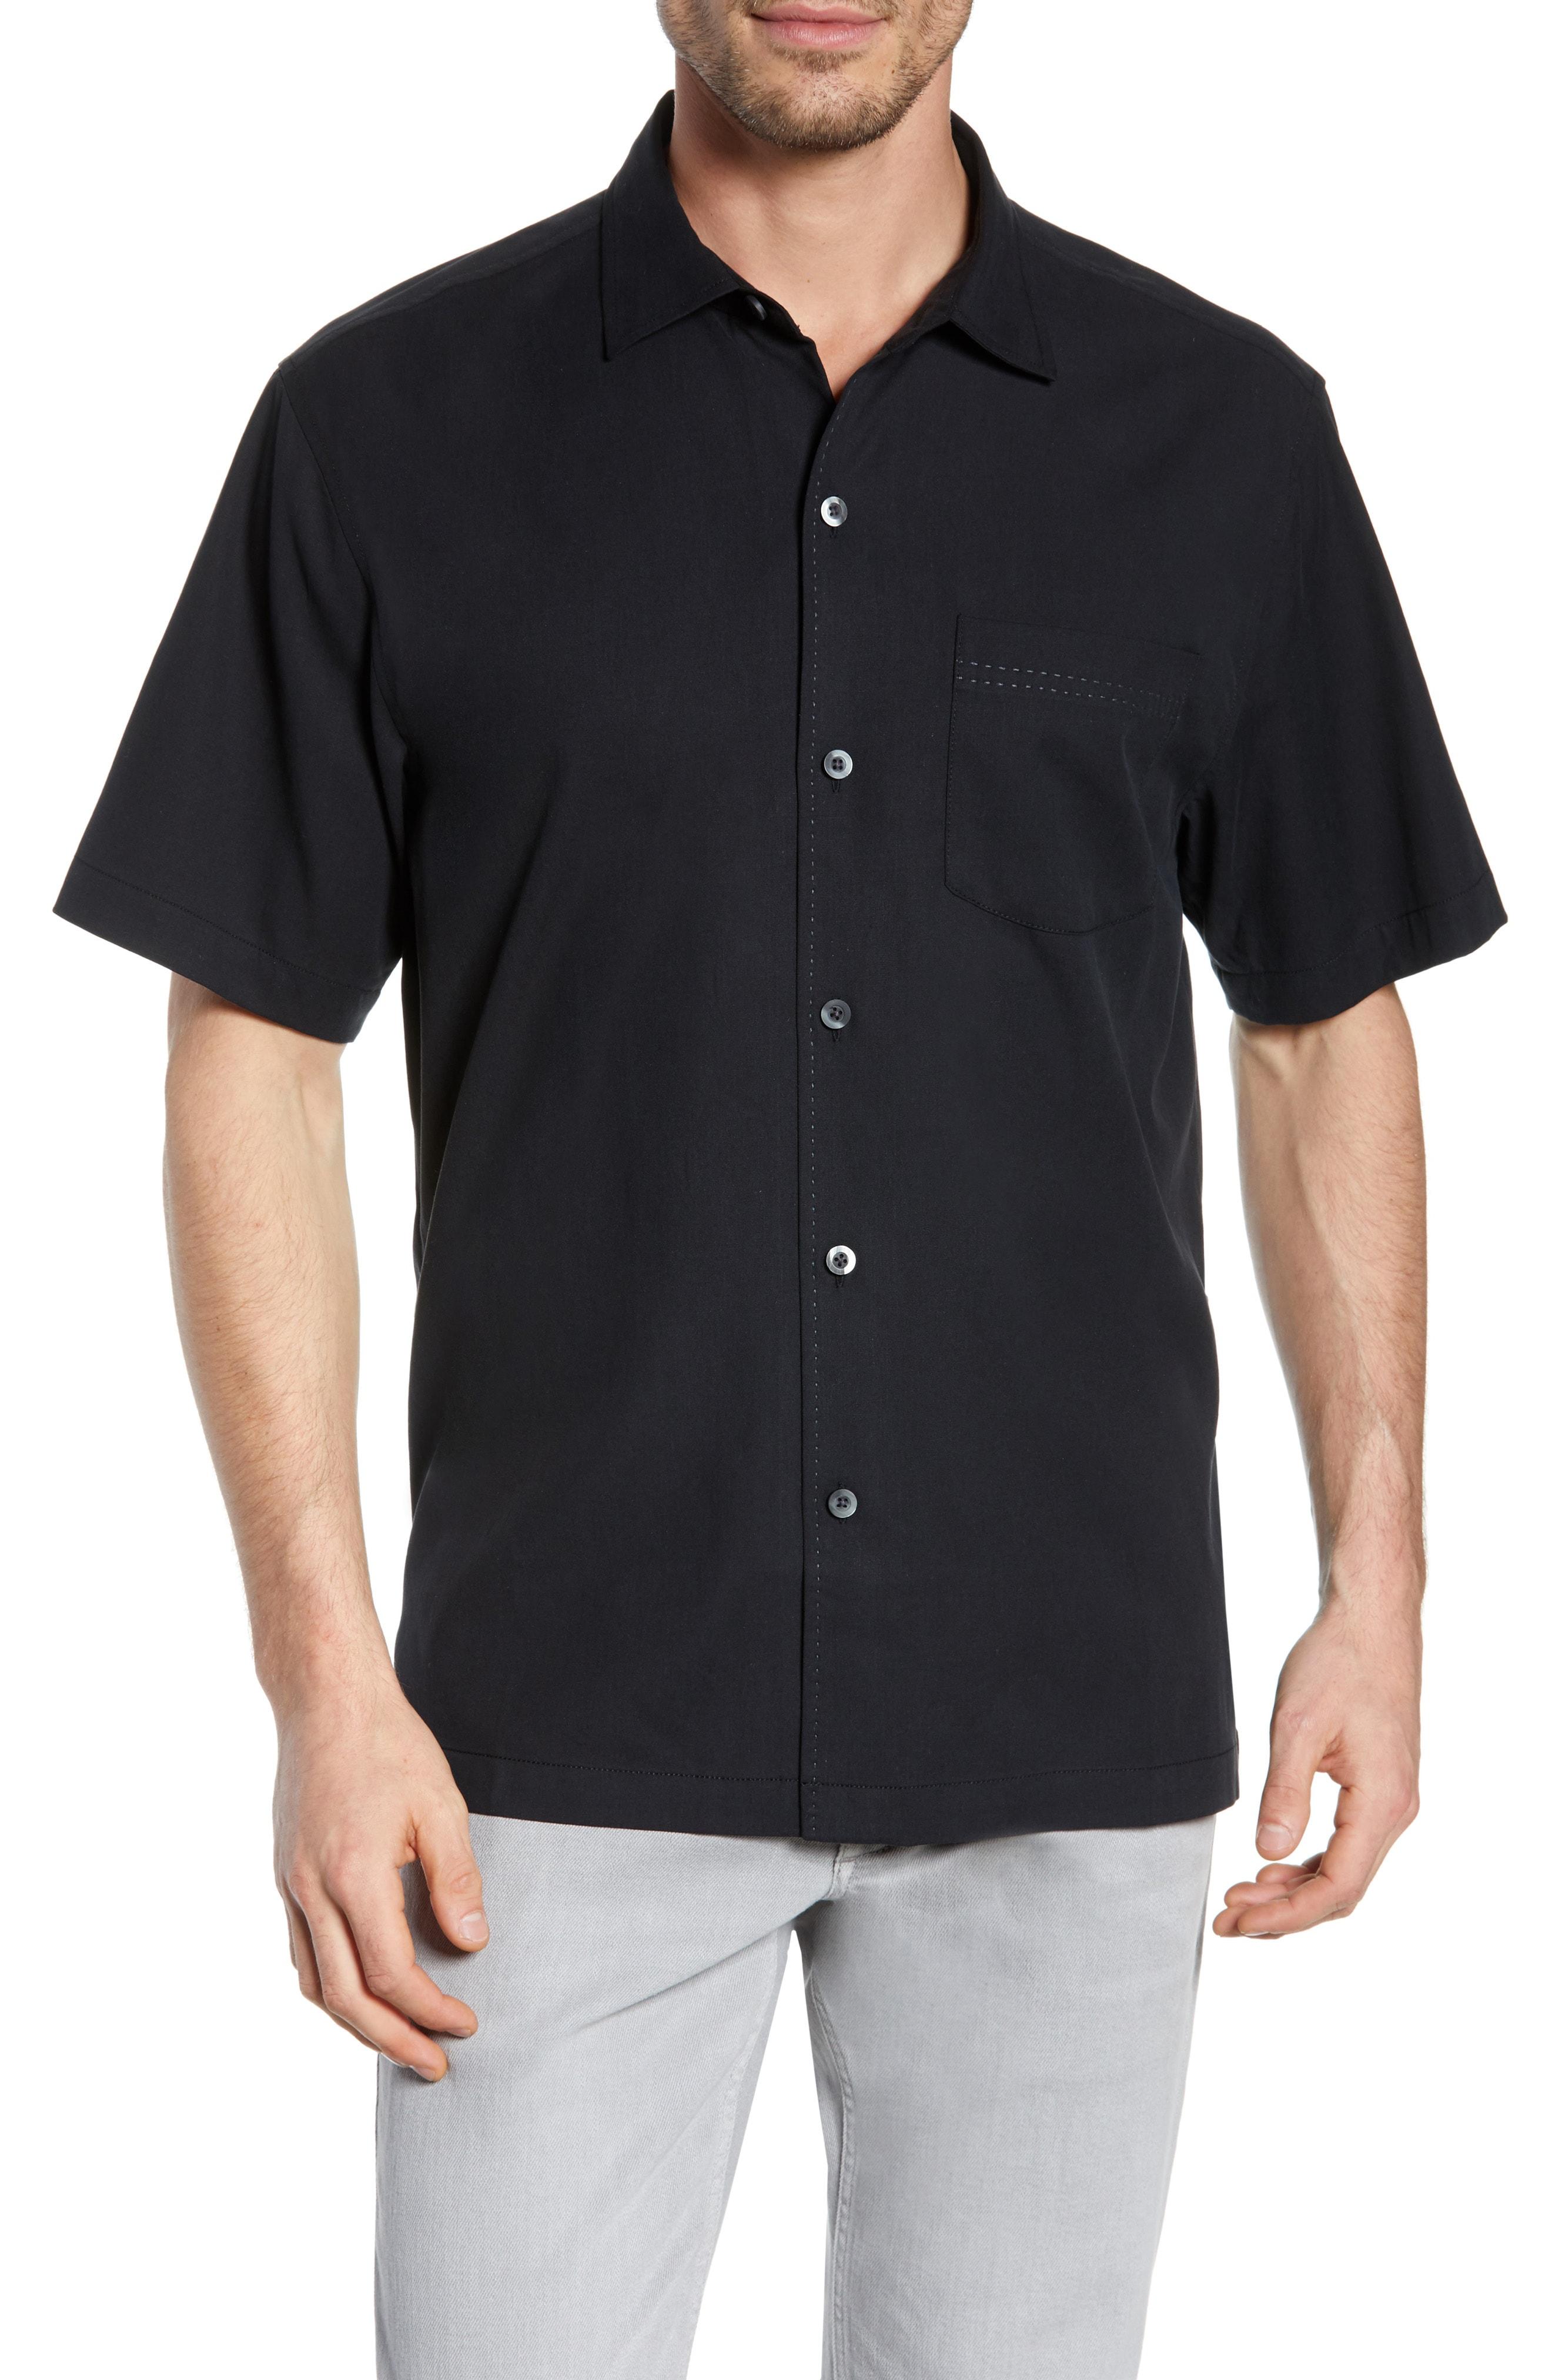 Lyst - Tommy Bahama Catalina Silk Blend Sport Shirt in Black for Men